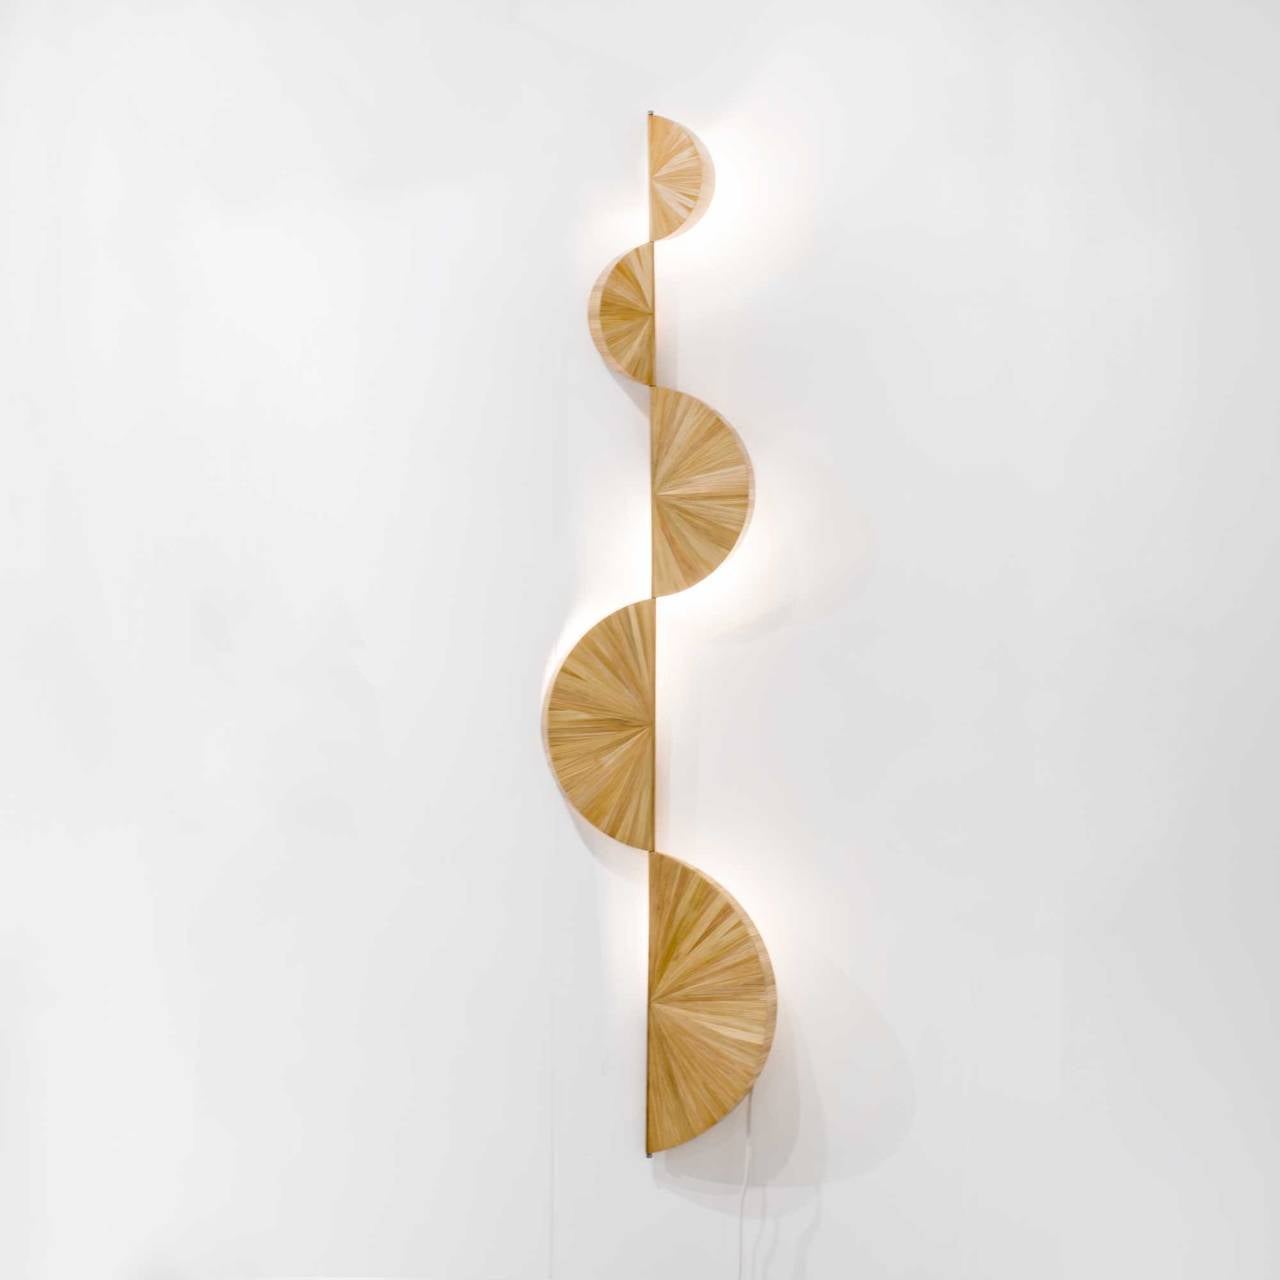 Serpentine sconce, 2005
Straw marquetry
Measure: H 59 x W 14 in each
(150 x 35.5 cm).